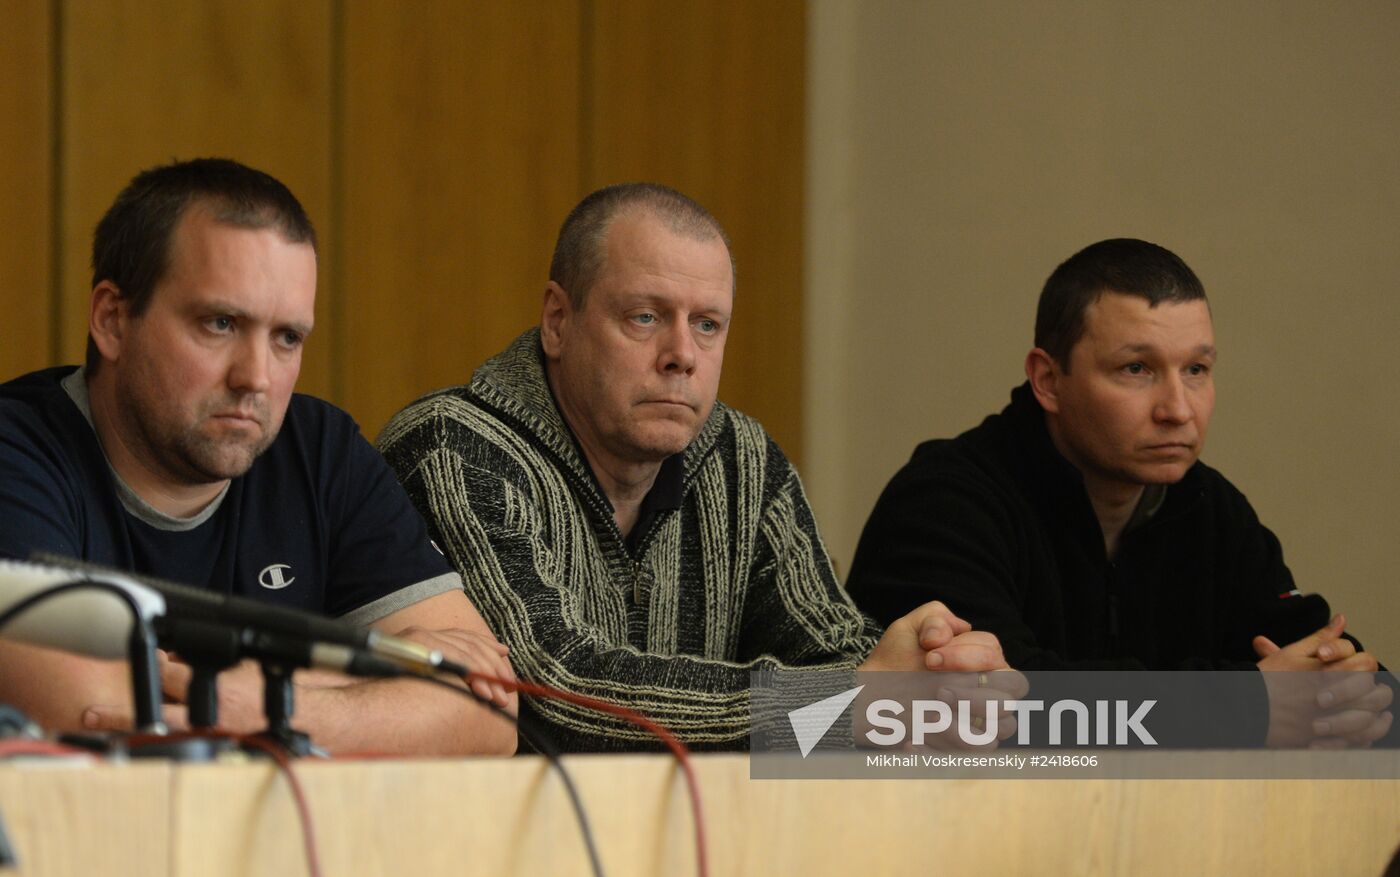 News conference by OSCE observers detained by self-defense forces in Ukraine